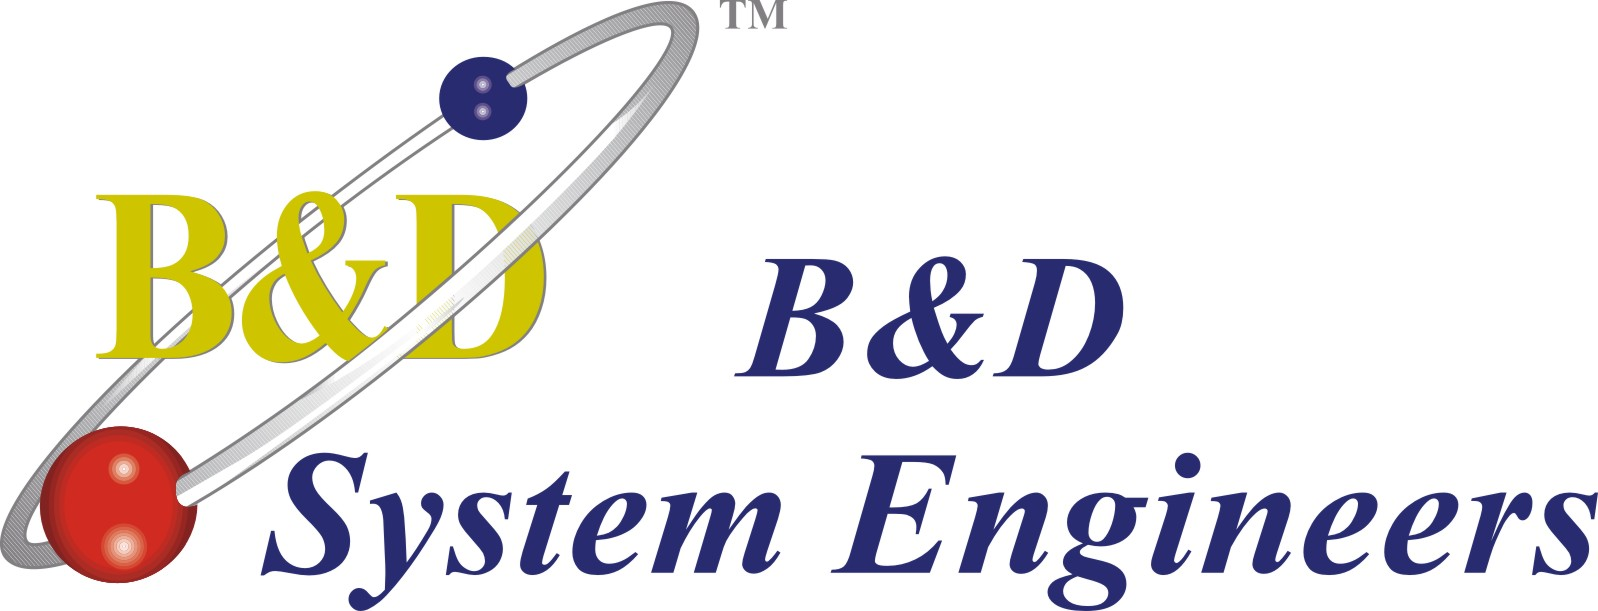 B & D system engineers